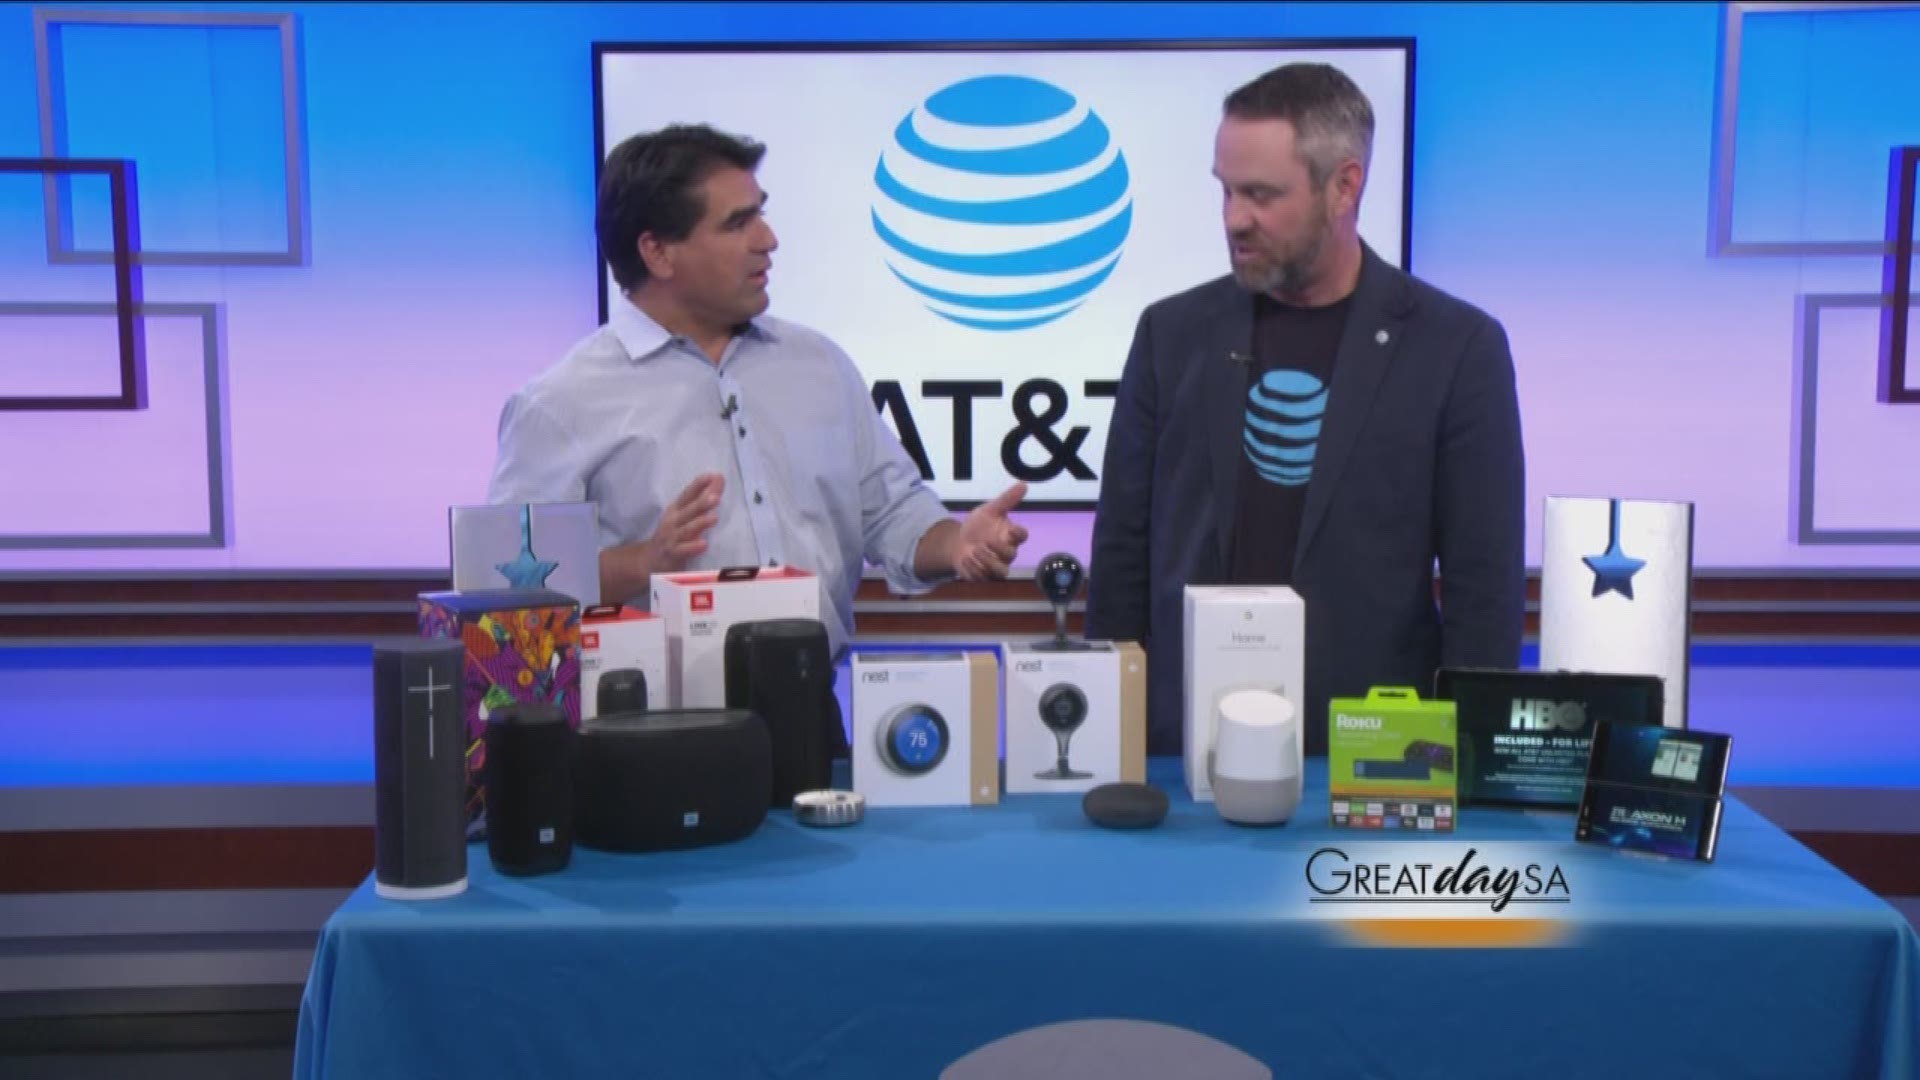 Holiday deals from AT&T!